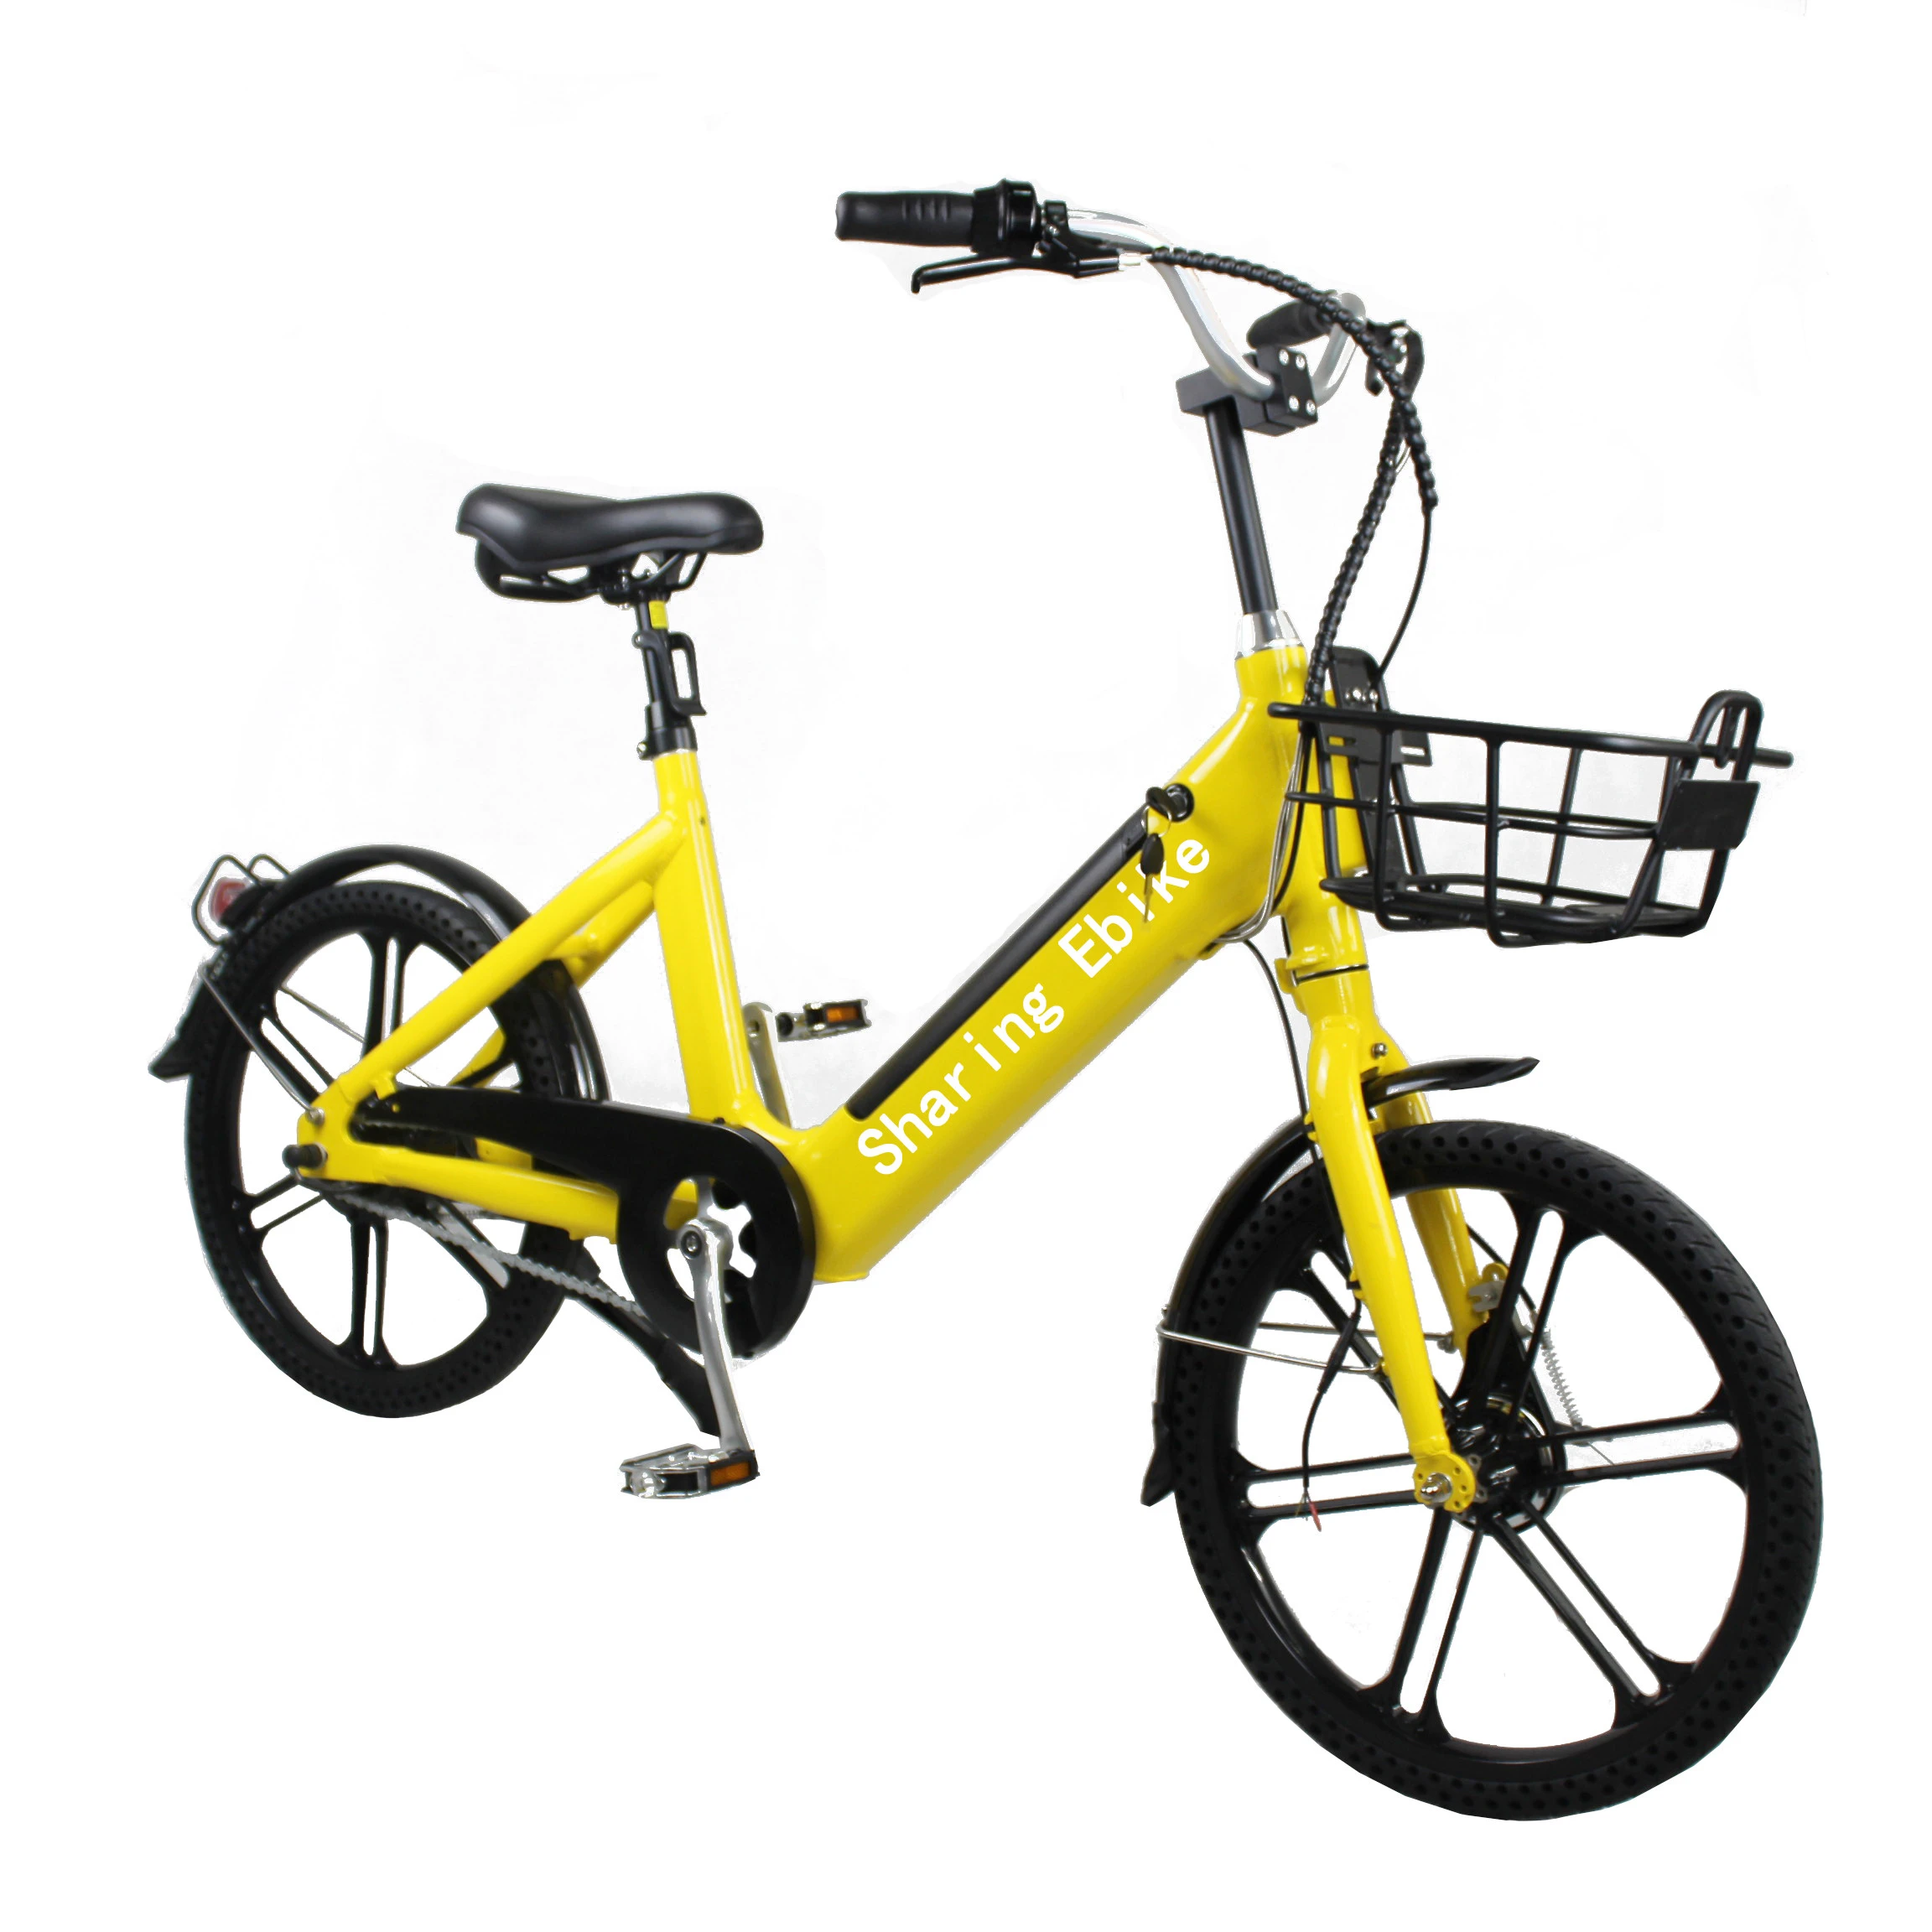 dynavolt hot sale sharing electric bicycle bike electric